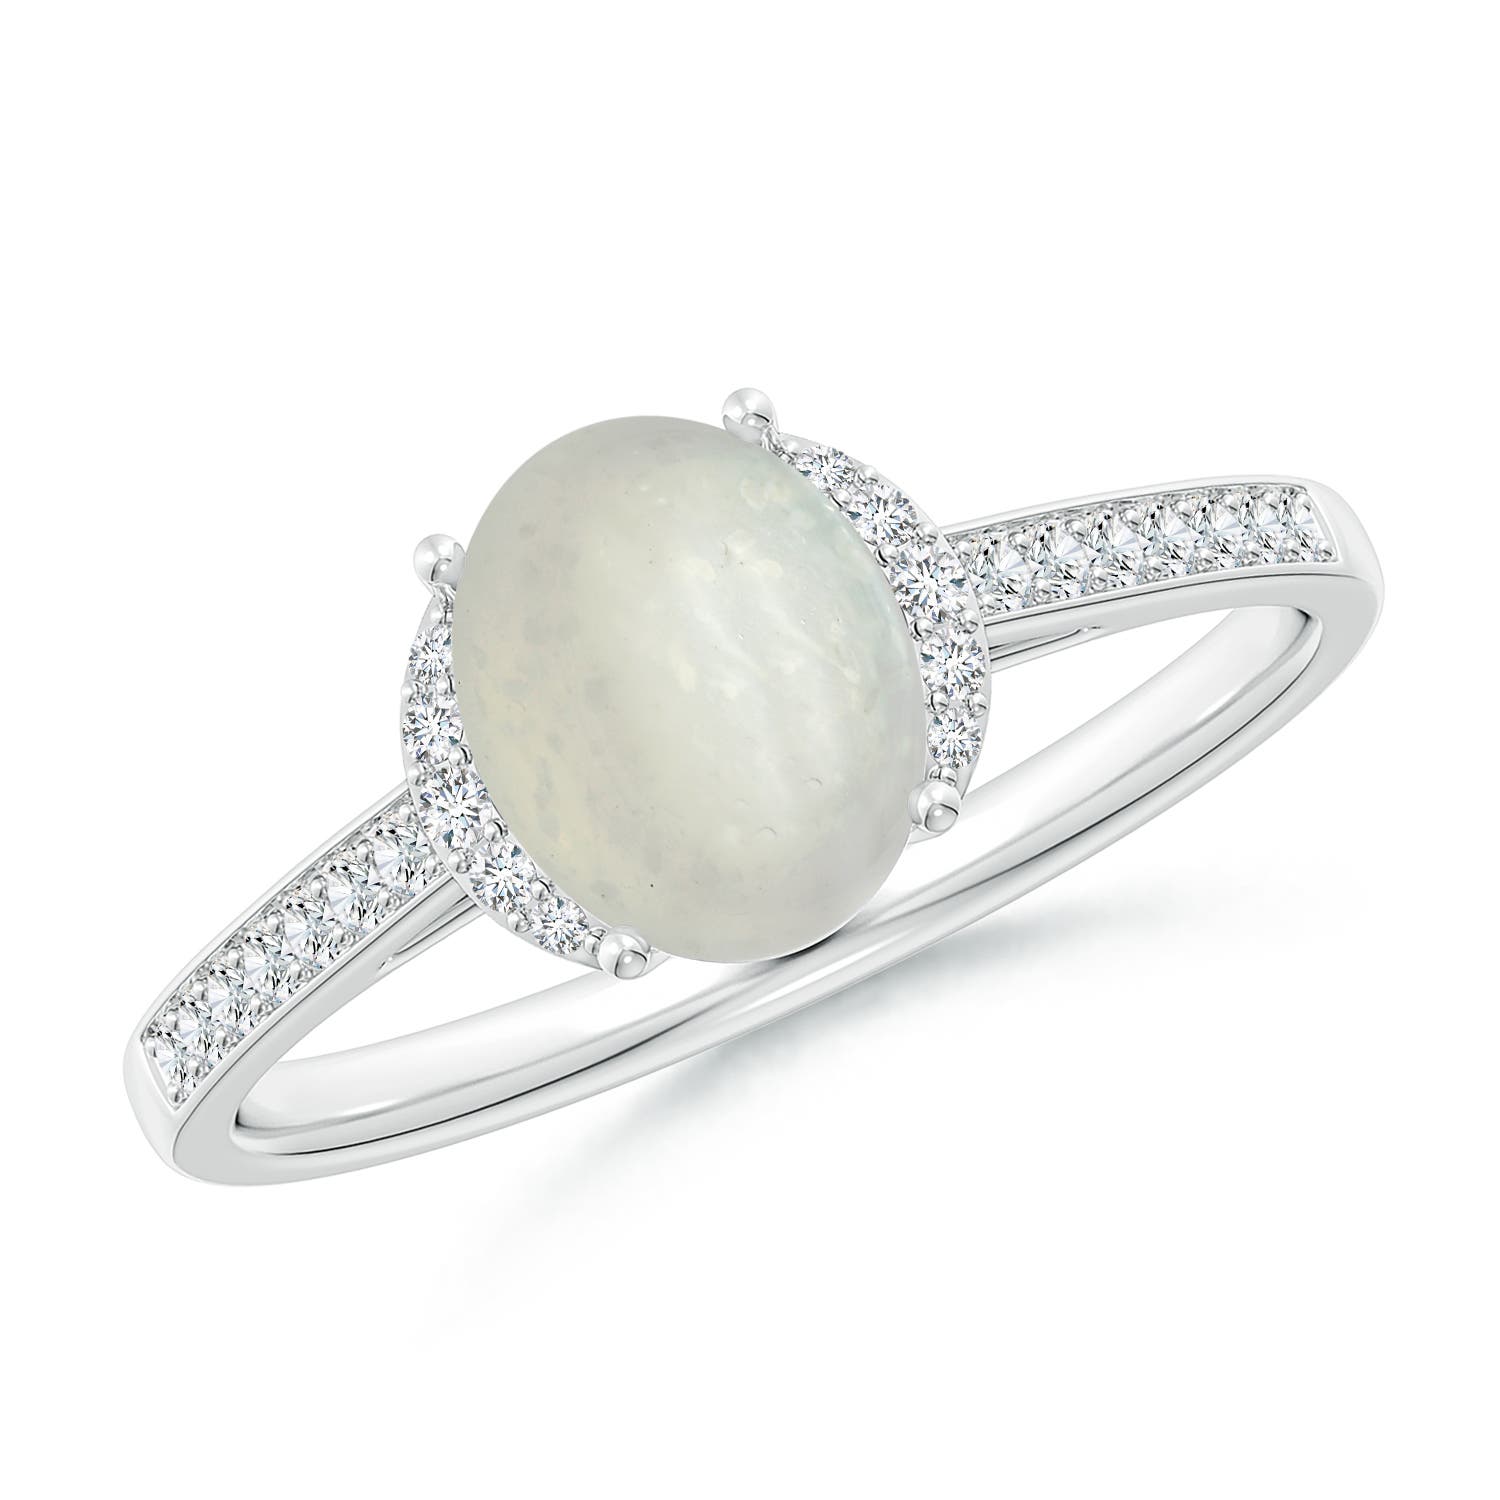 A - Moonstone / 1.23 CT / 14 KT White Gold